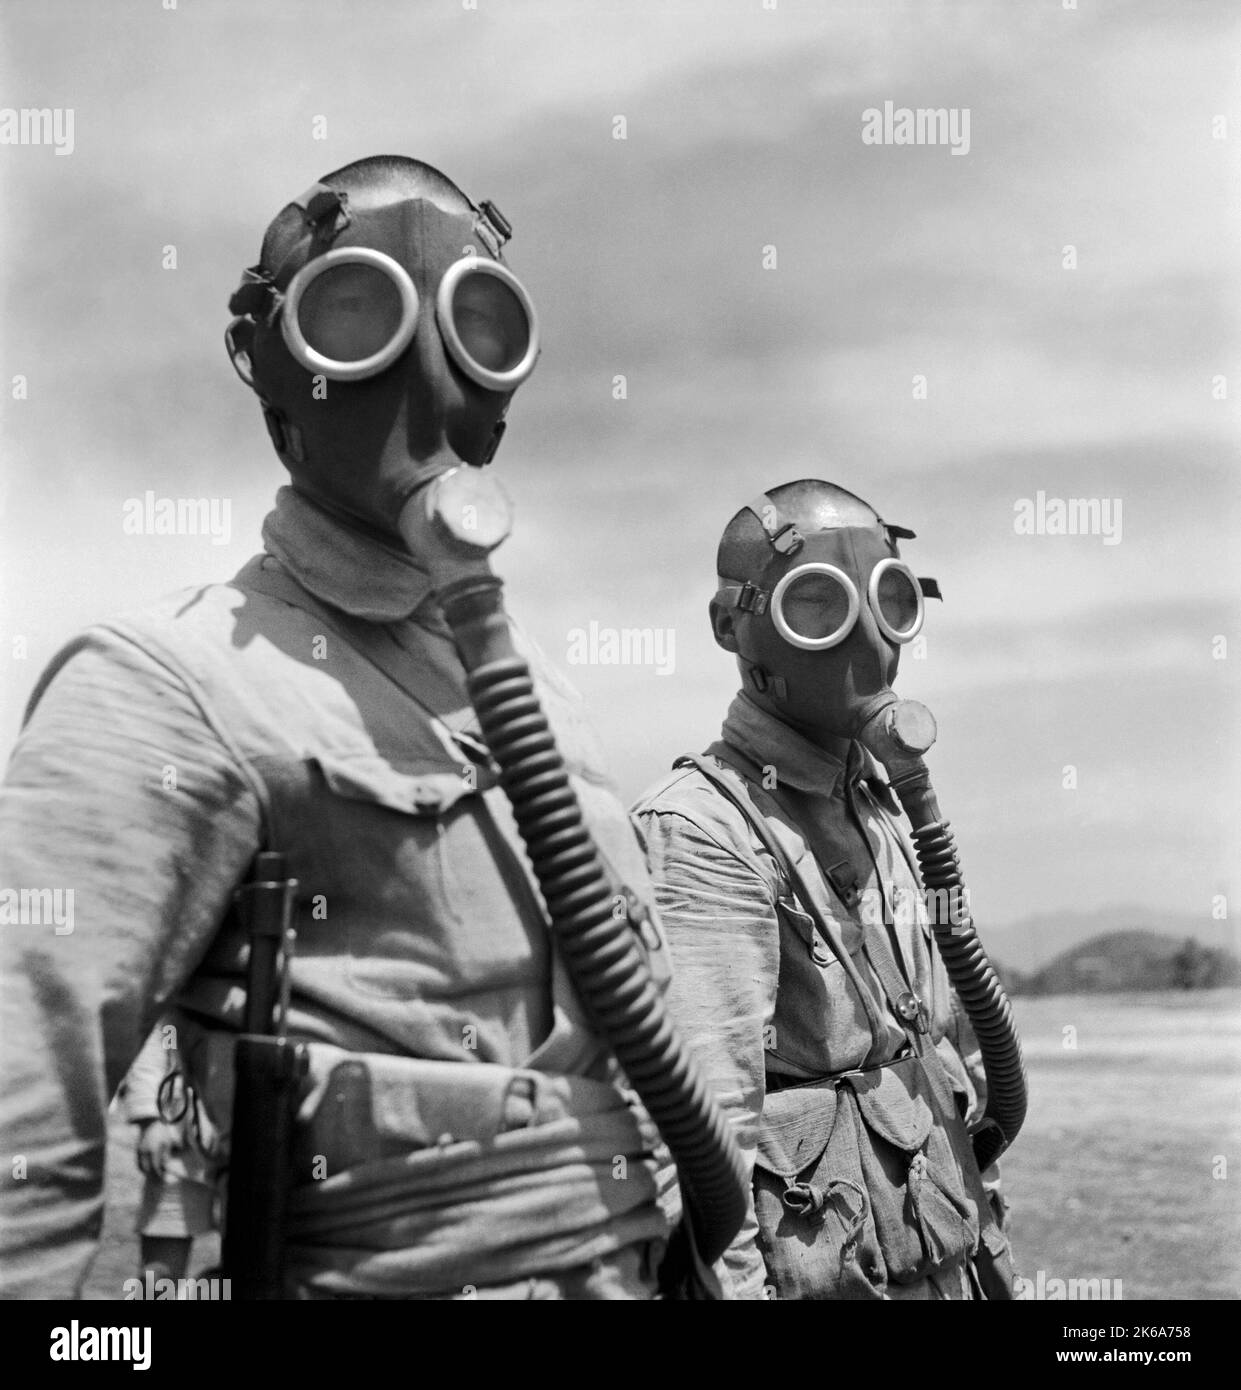 Chinese soldiers wearing gas masks during World War II, 1944. Stock Photo